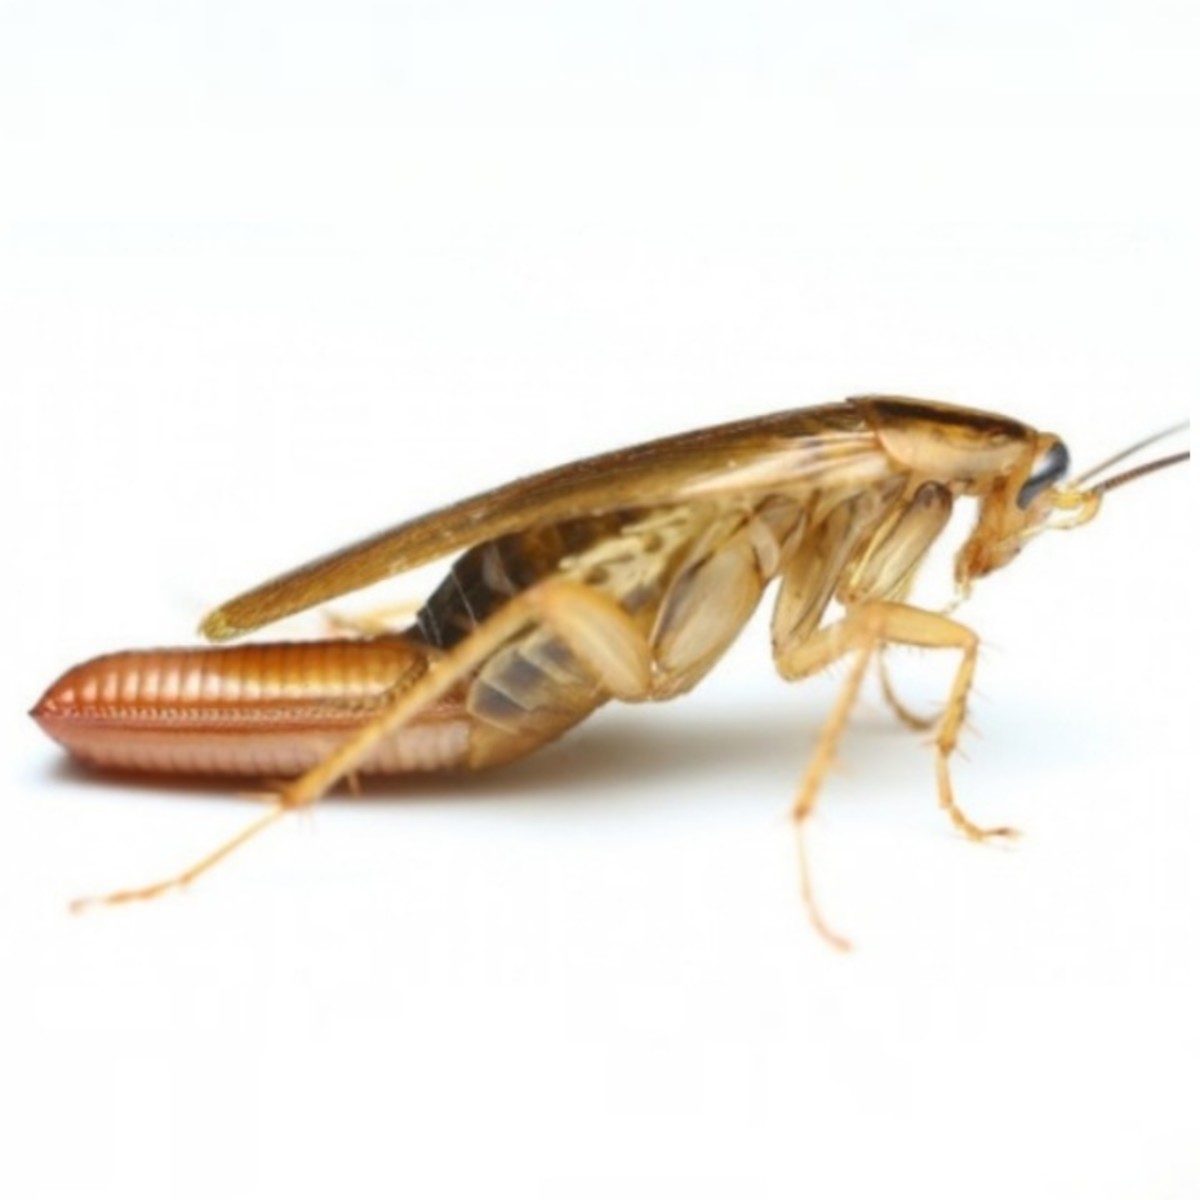 A female cockroach can reproduce without a male and produce 200 offspring in her lifetime.